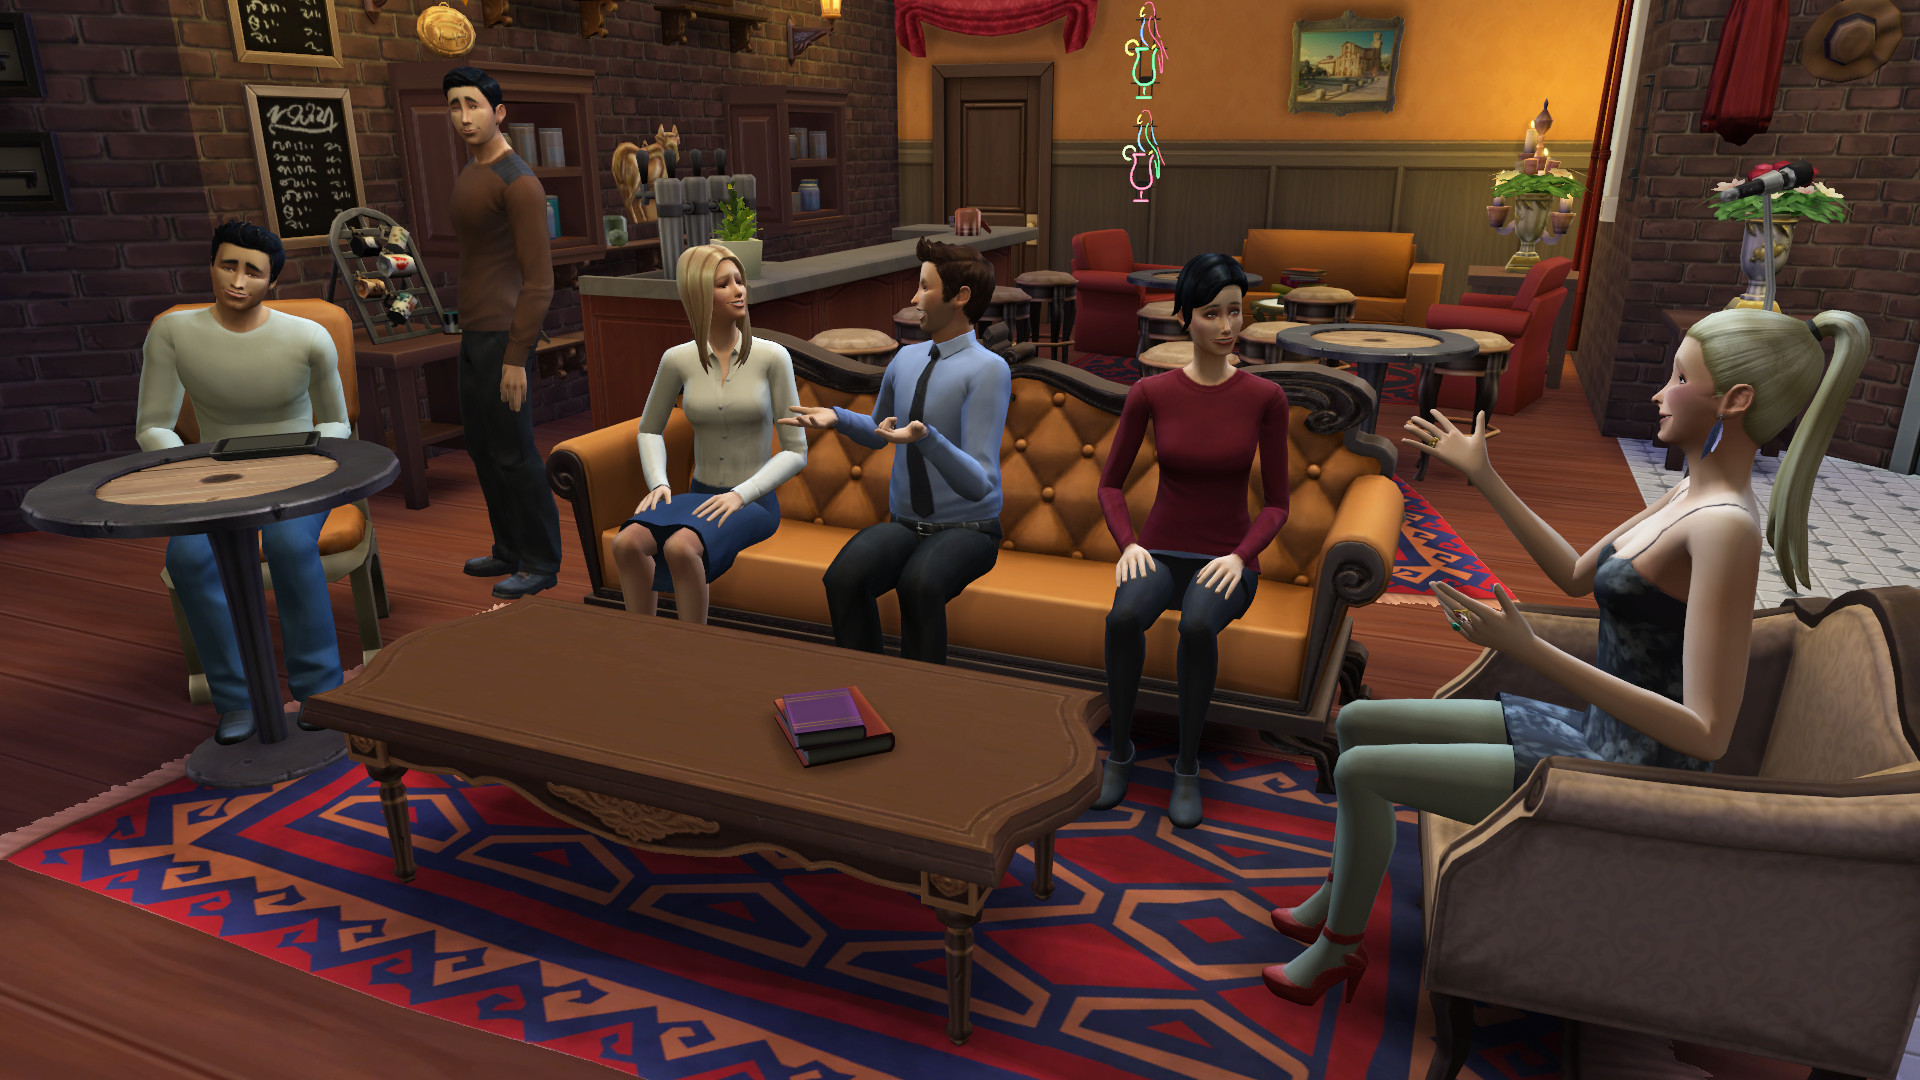 1920x1080 Someone recreated Friends in The Sims 4 and did a damn fine job | The  Independent